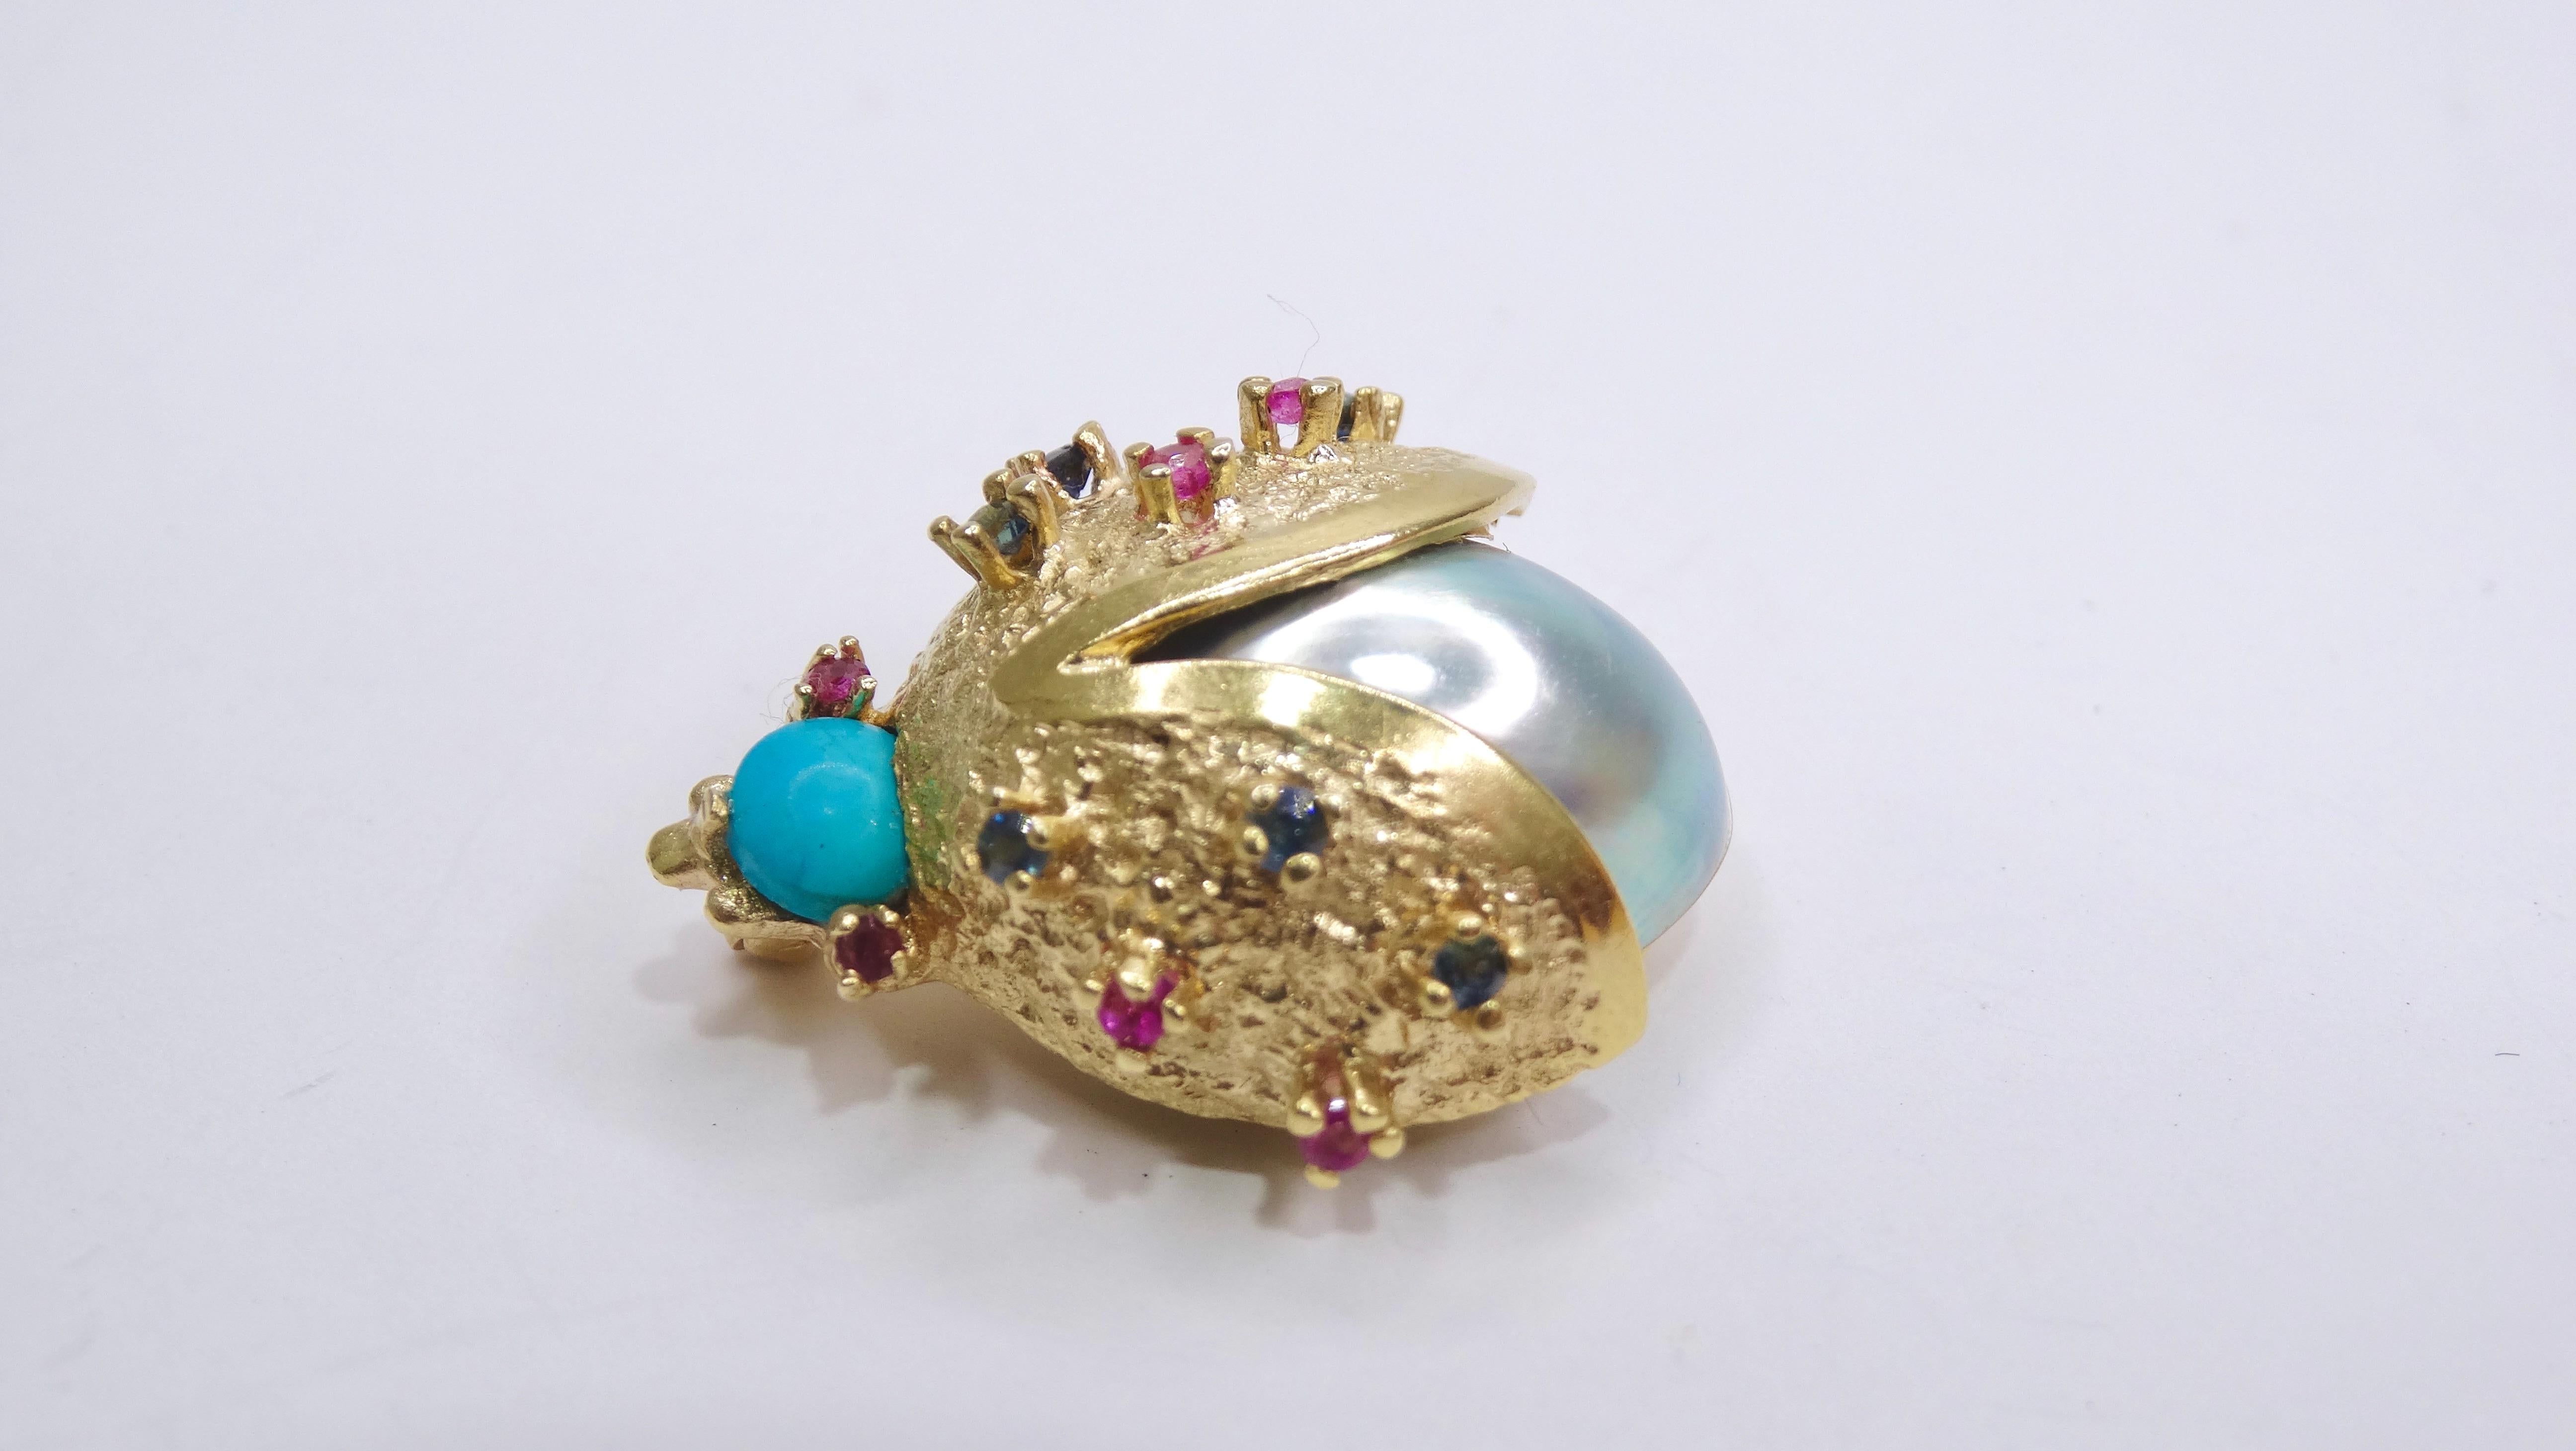 Add a little playfulness to your outfit with this cute ladybug brooch. Made of a large pearl body paired with 14k gold, turquoise, Sapphire, and Ruby. Wait for the compliments as everyone will be admiring the adorable adornment. Wear this broach on